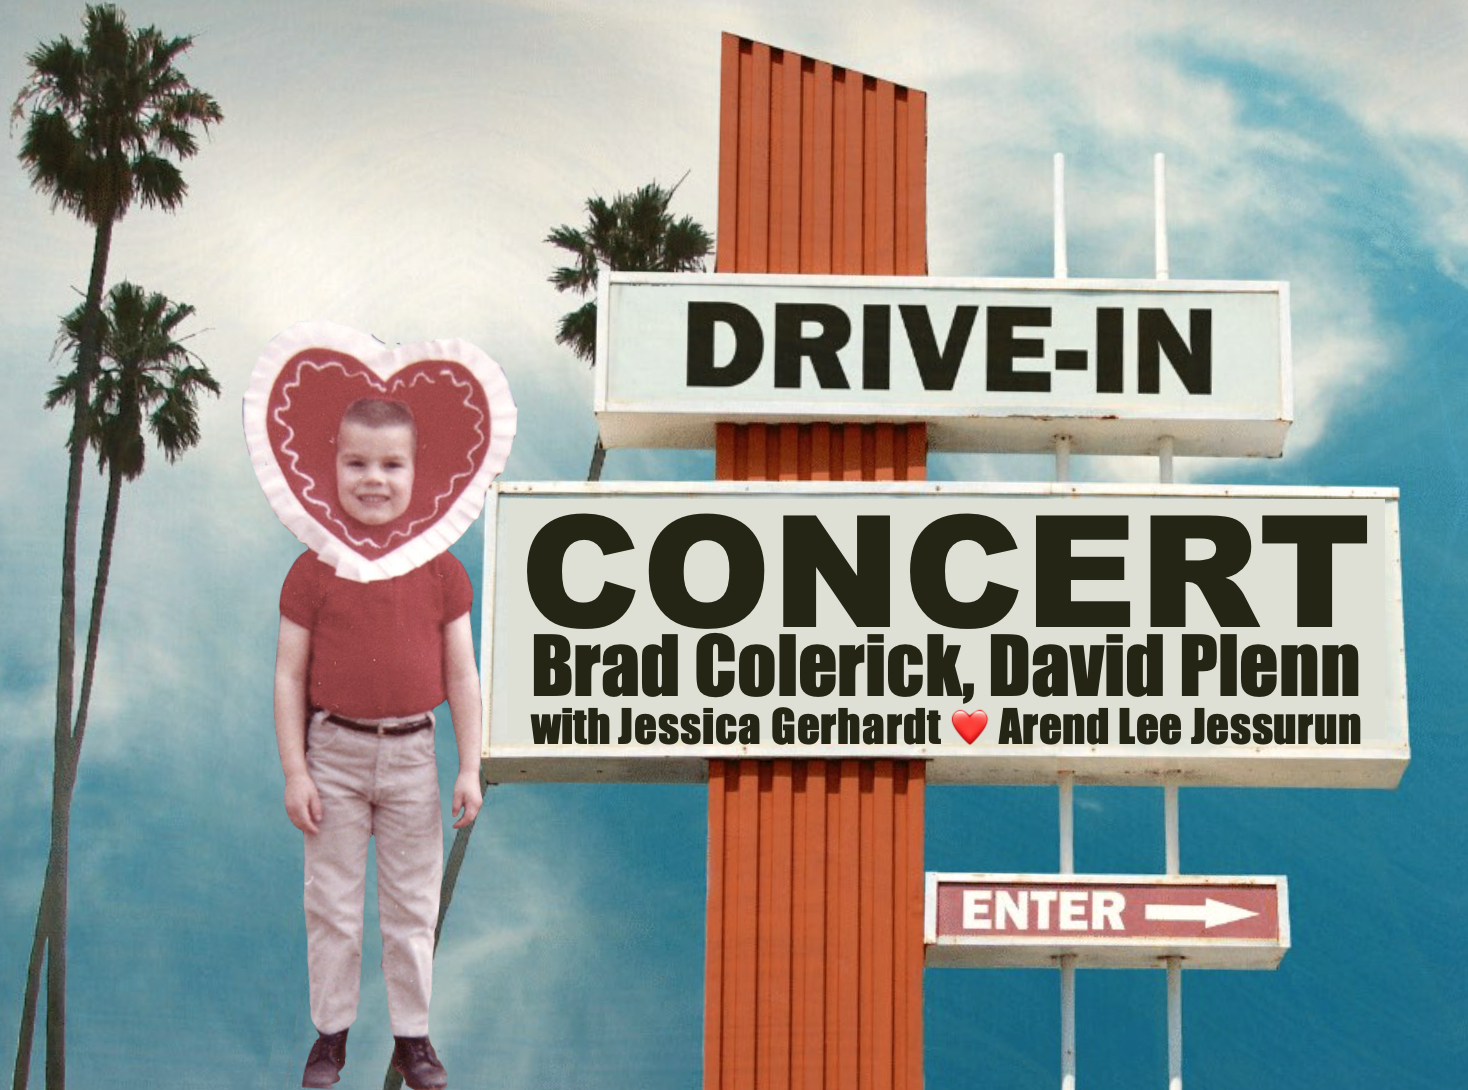 Valentine’s Day “Drivein” Concert in South Pasadena The South